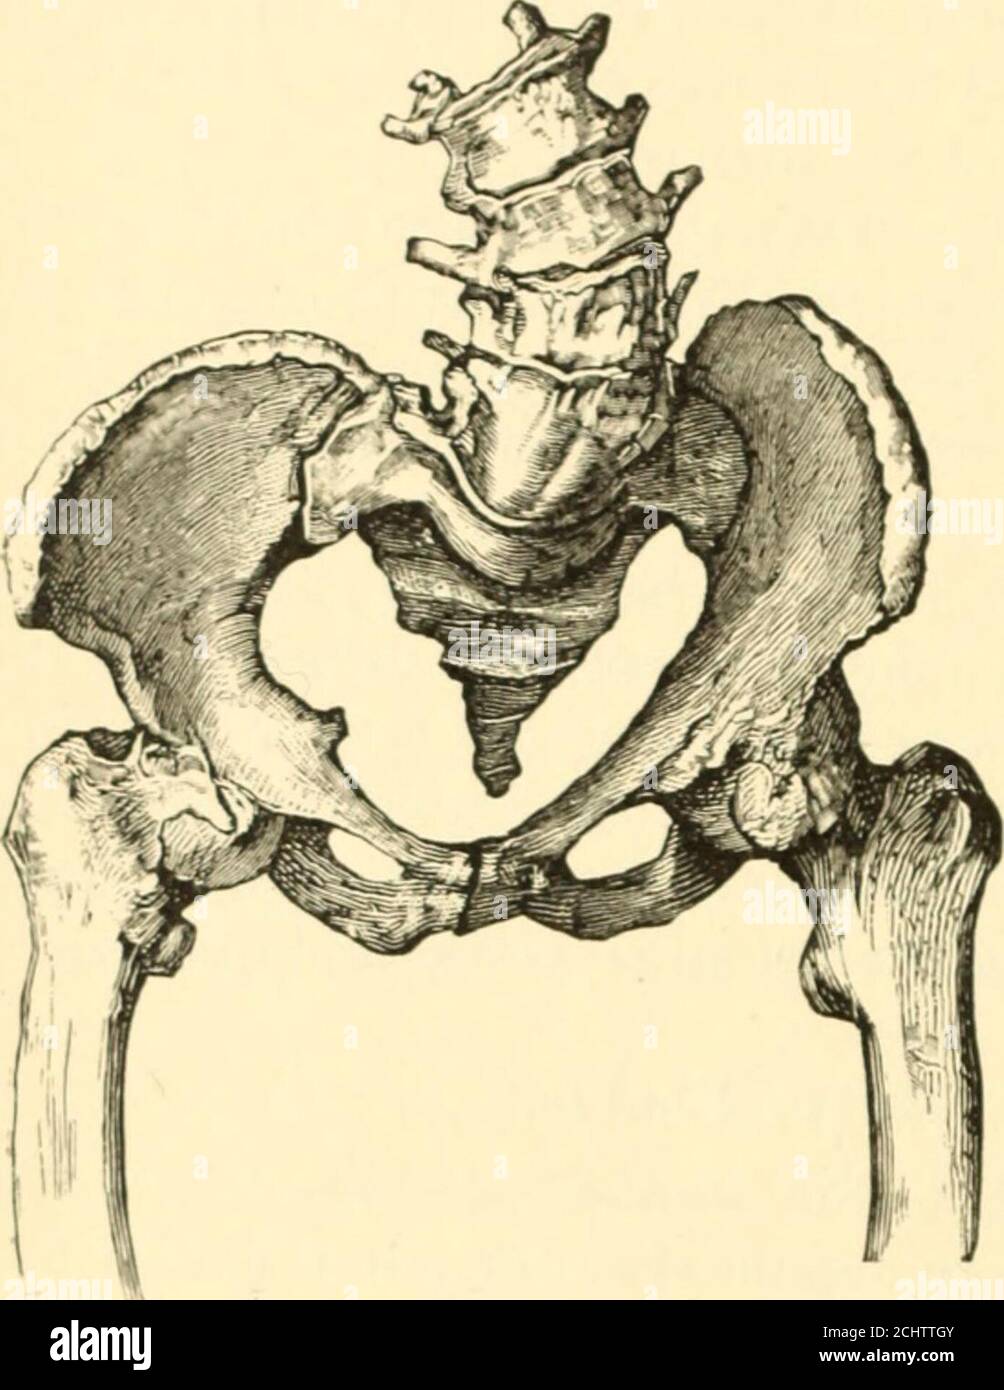 . The science and art of midwifery . ard. Theoblique diameter of this side is greater, hut the distance between thesacrum and t he acetabulum (distantia sacro-COtyhidea) is much shorterthan (ill the uncontracted side. The plane of the inlet is obliquelycordiform, being contracted upon the side of the lumbar scoliosis andexpanded on the other. Exactly the reverse conditions obtain at thepelvic outlet.* The conjugata vera is notably shortened by the pro-truding promontory. The antero-posterior diameter of the outlet,although contracted, still far surpasses the conjugata vera in Length.Other and Stock Photo